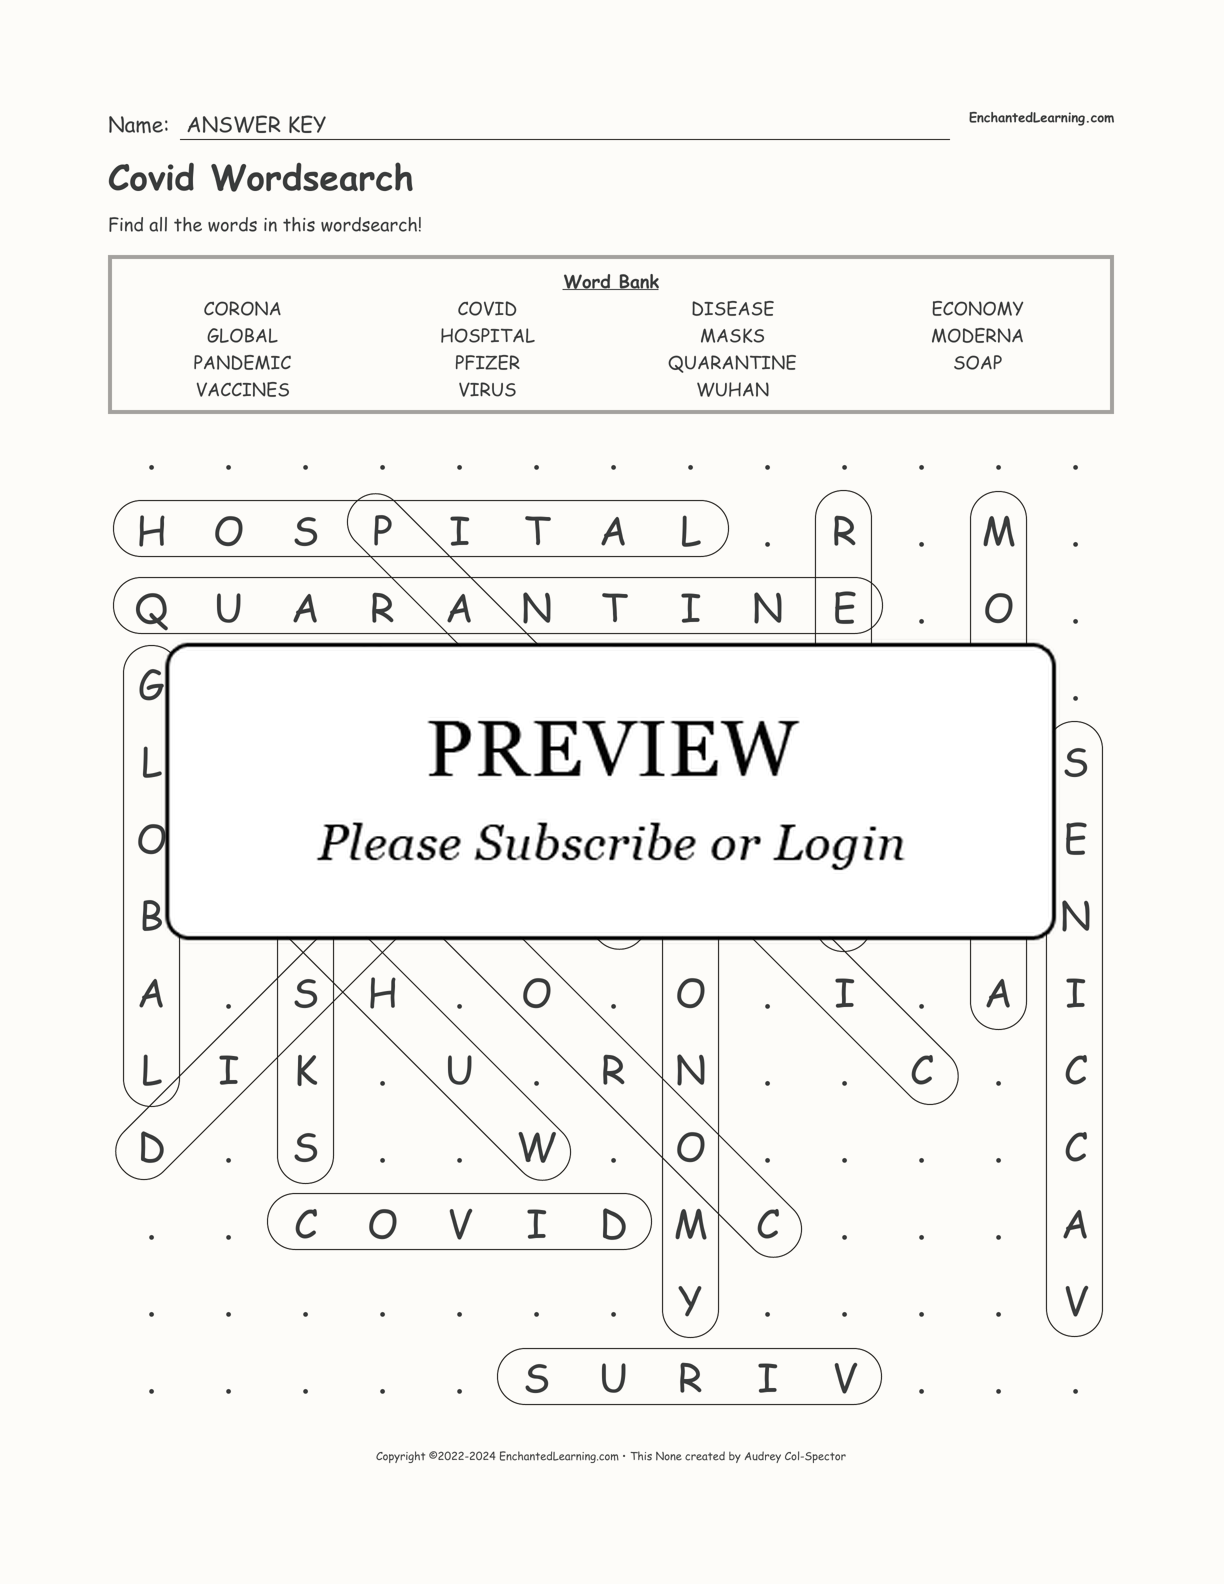 Covid Wordsearch interactive worksheet page 2